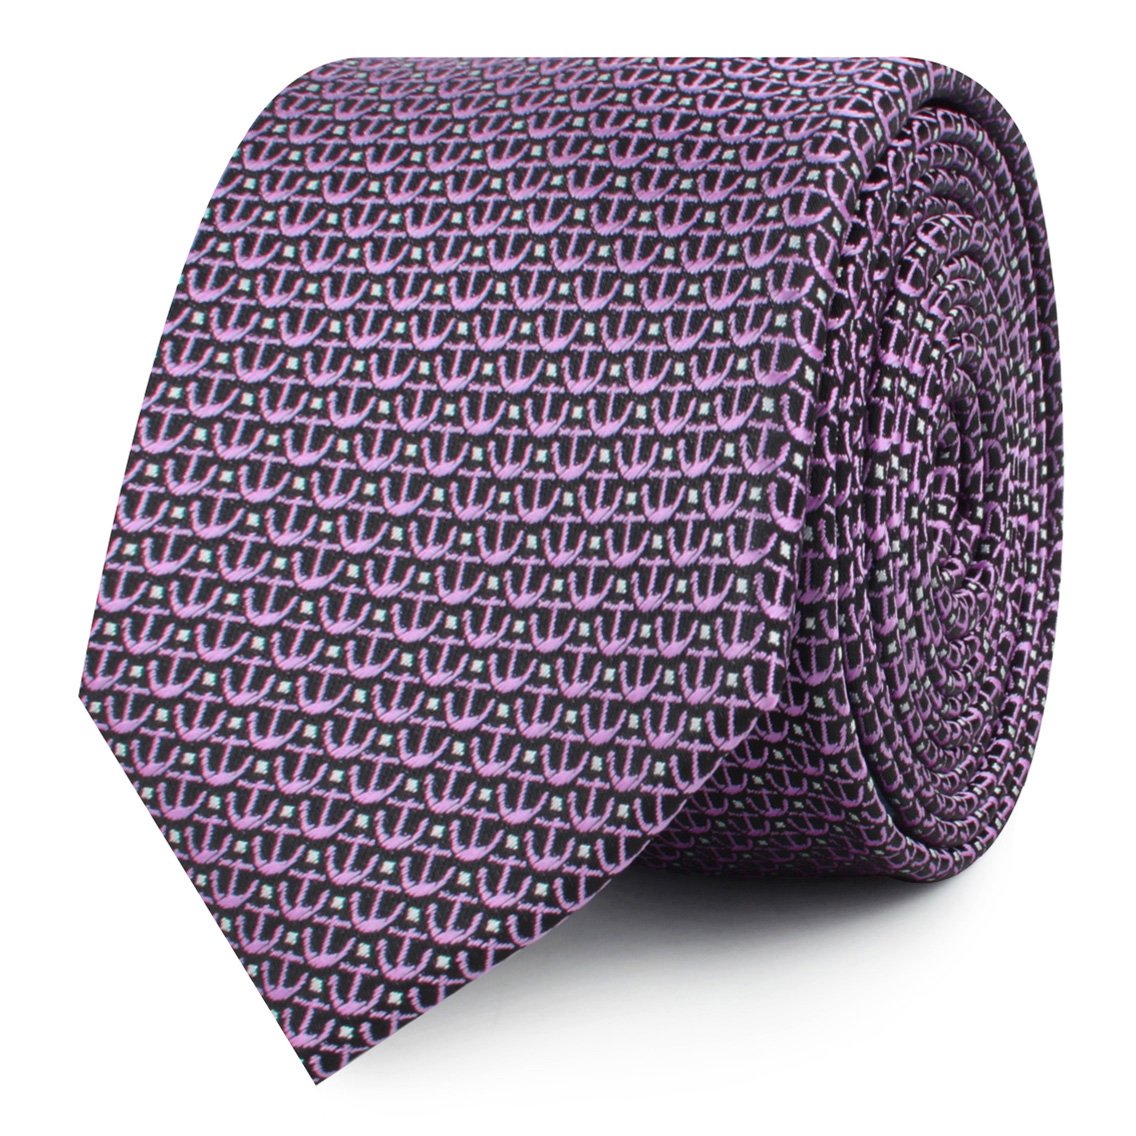 The Abacos Pink Anchor Skinny Ties